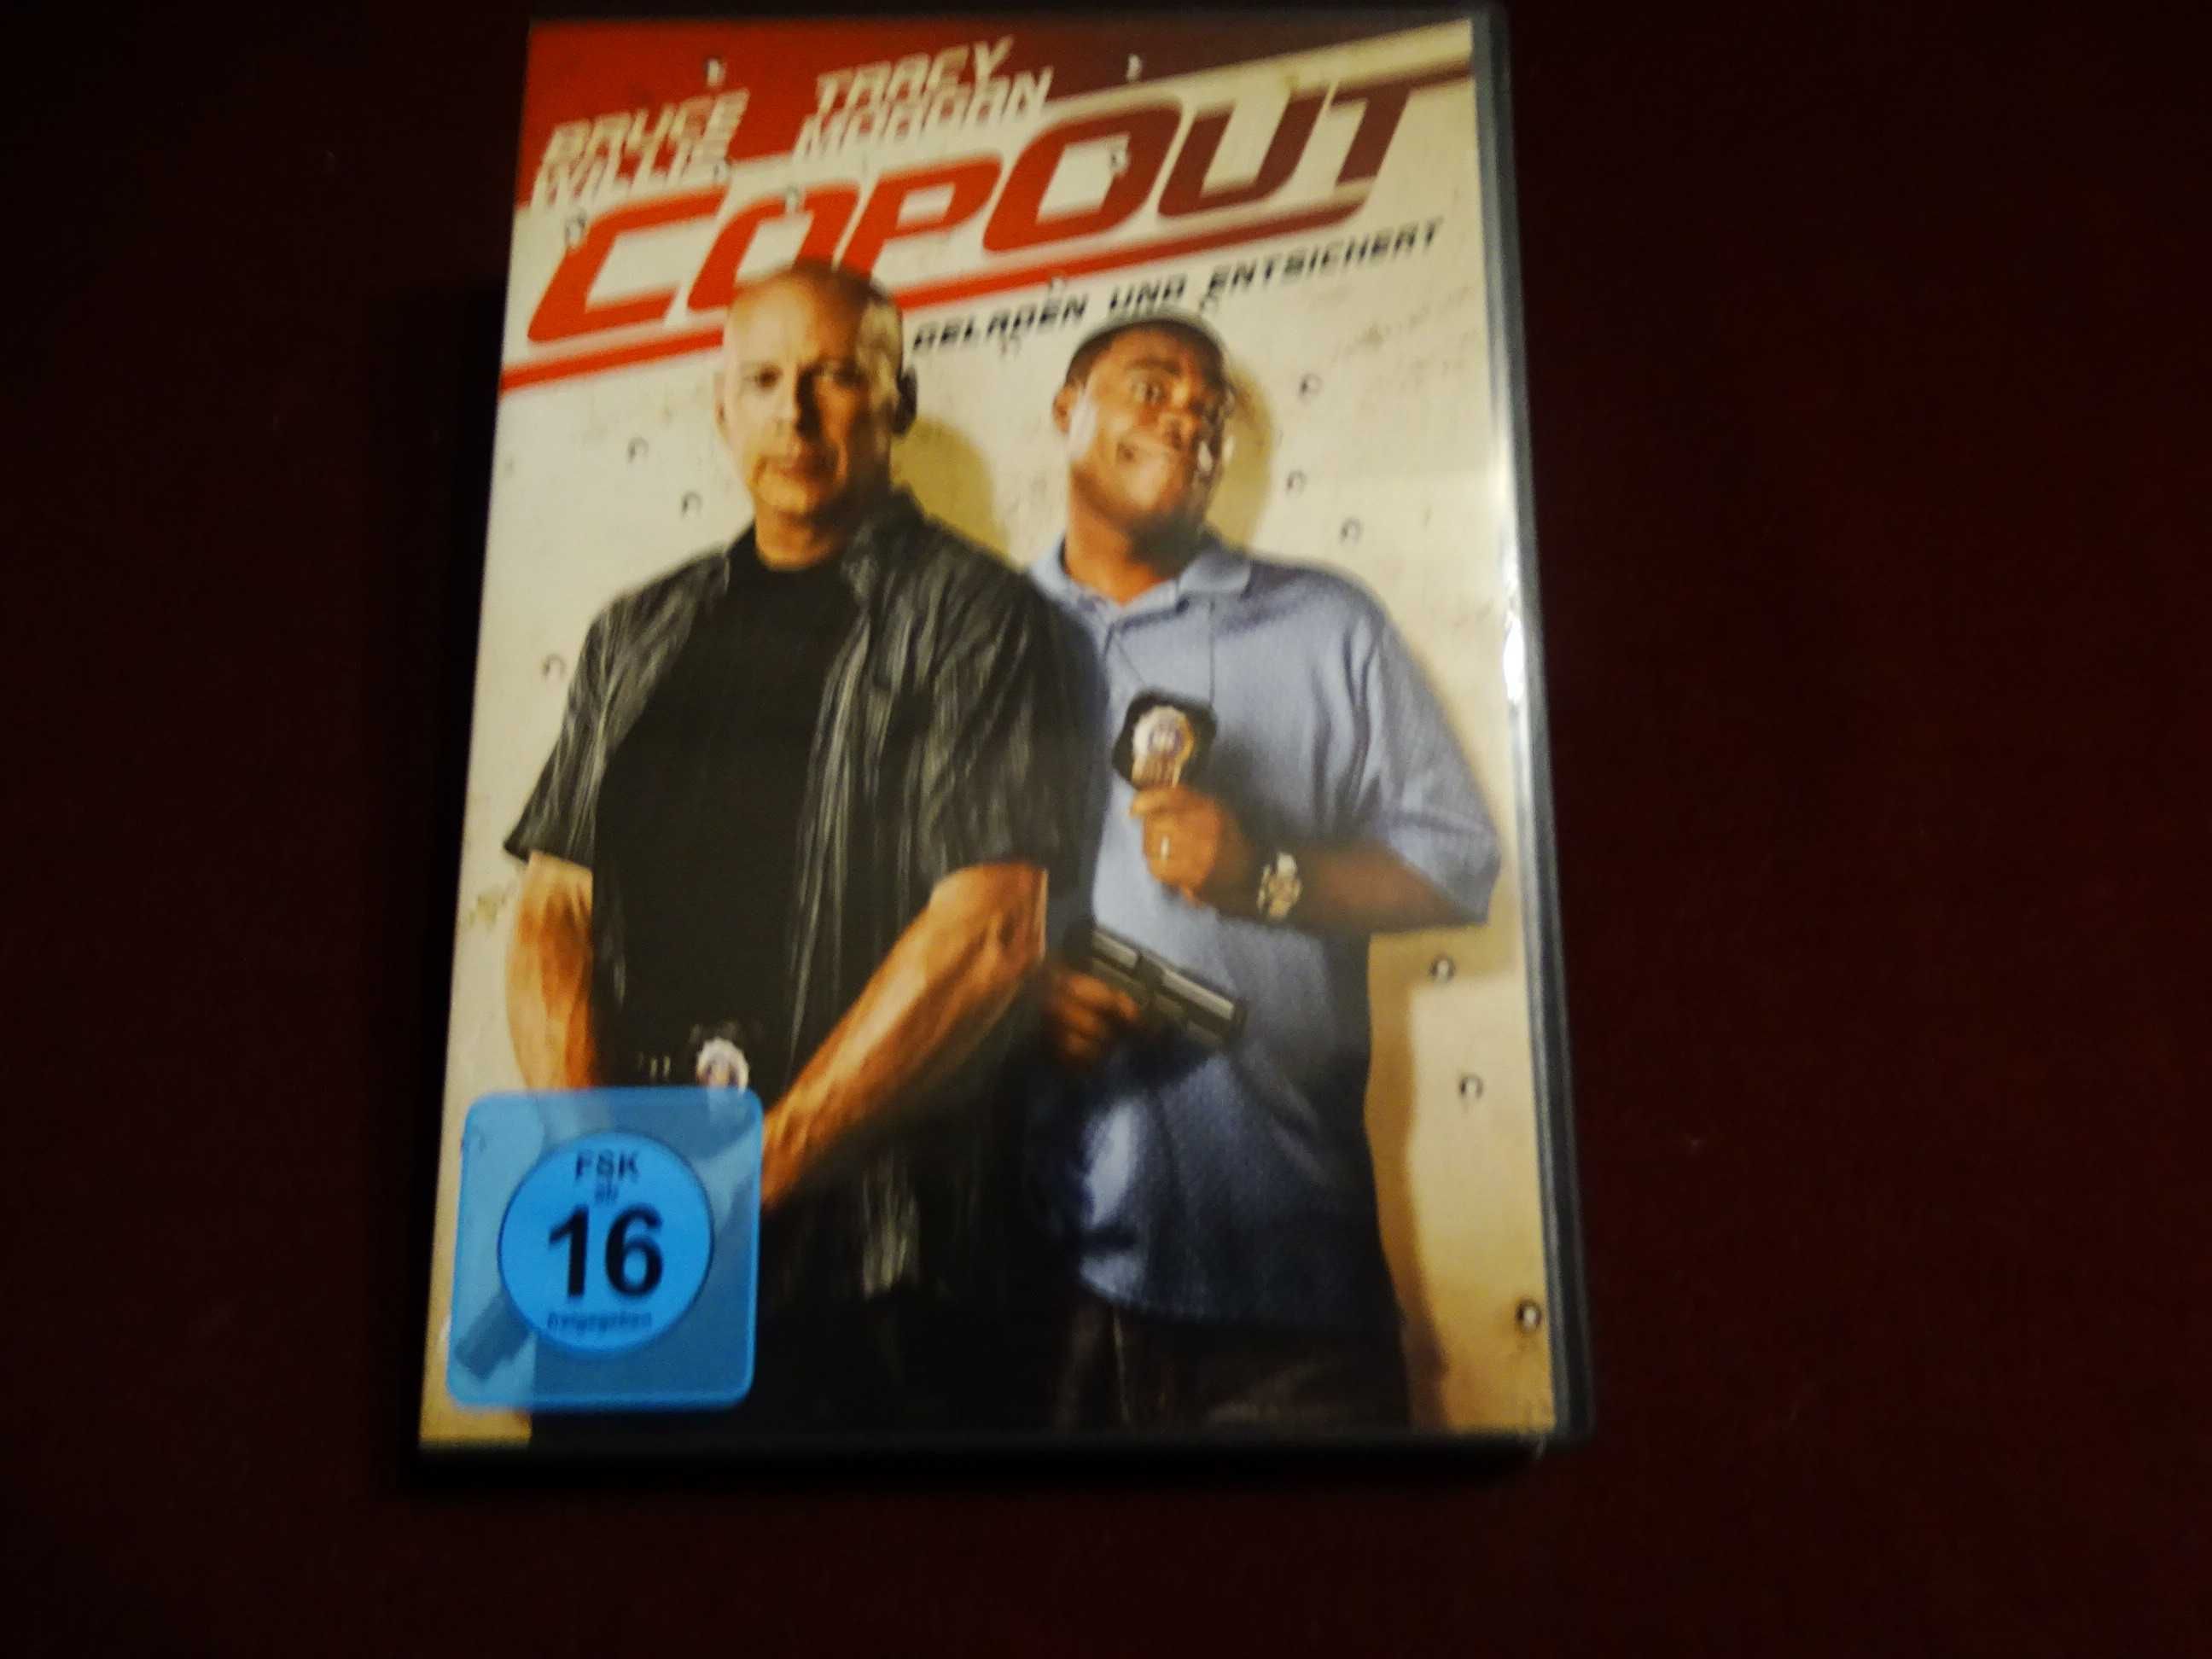 DVD-Copout-Bruce Willis/Tracy Morgan